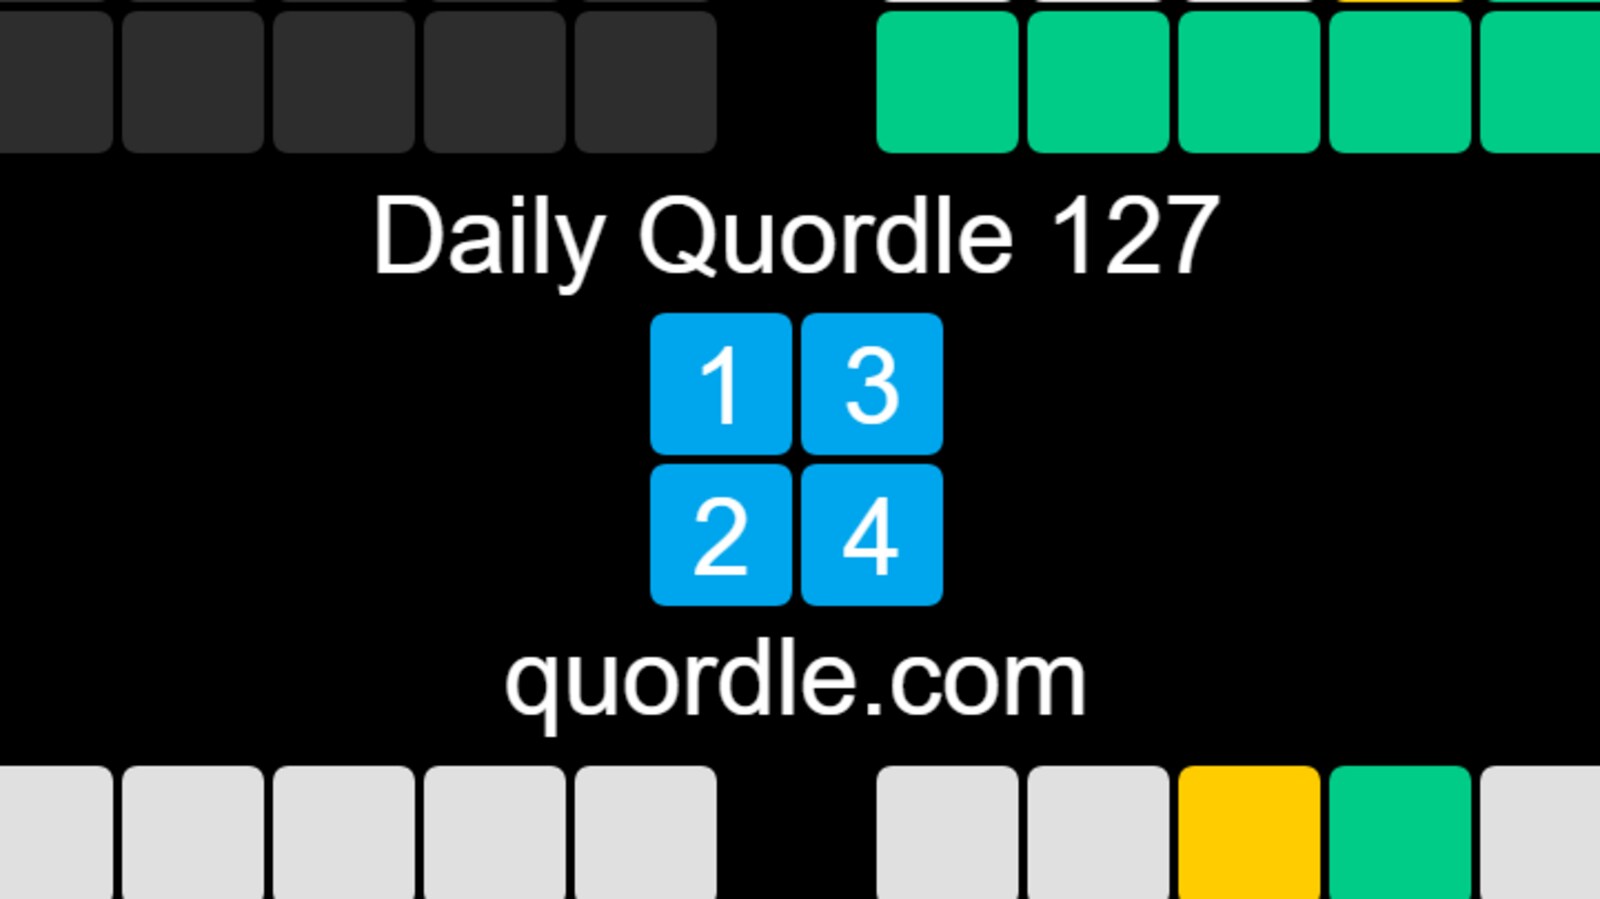 Quordle Daily Sequence